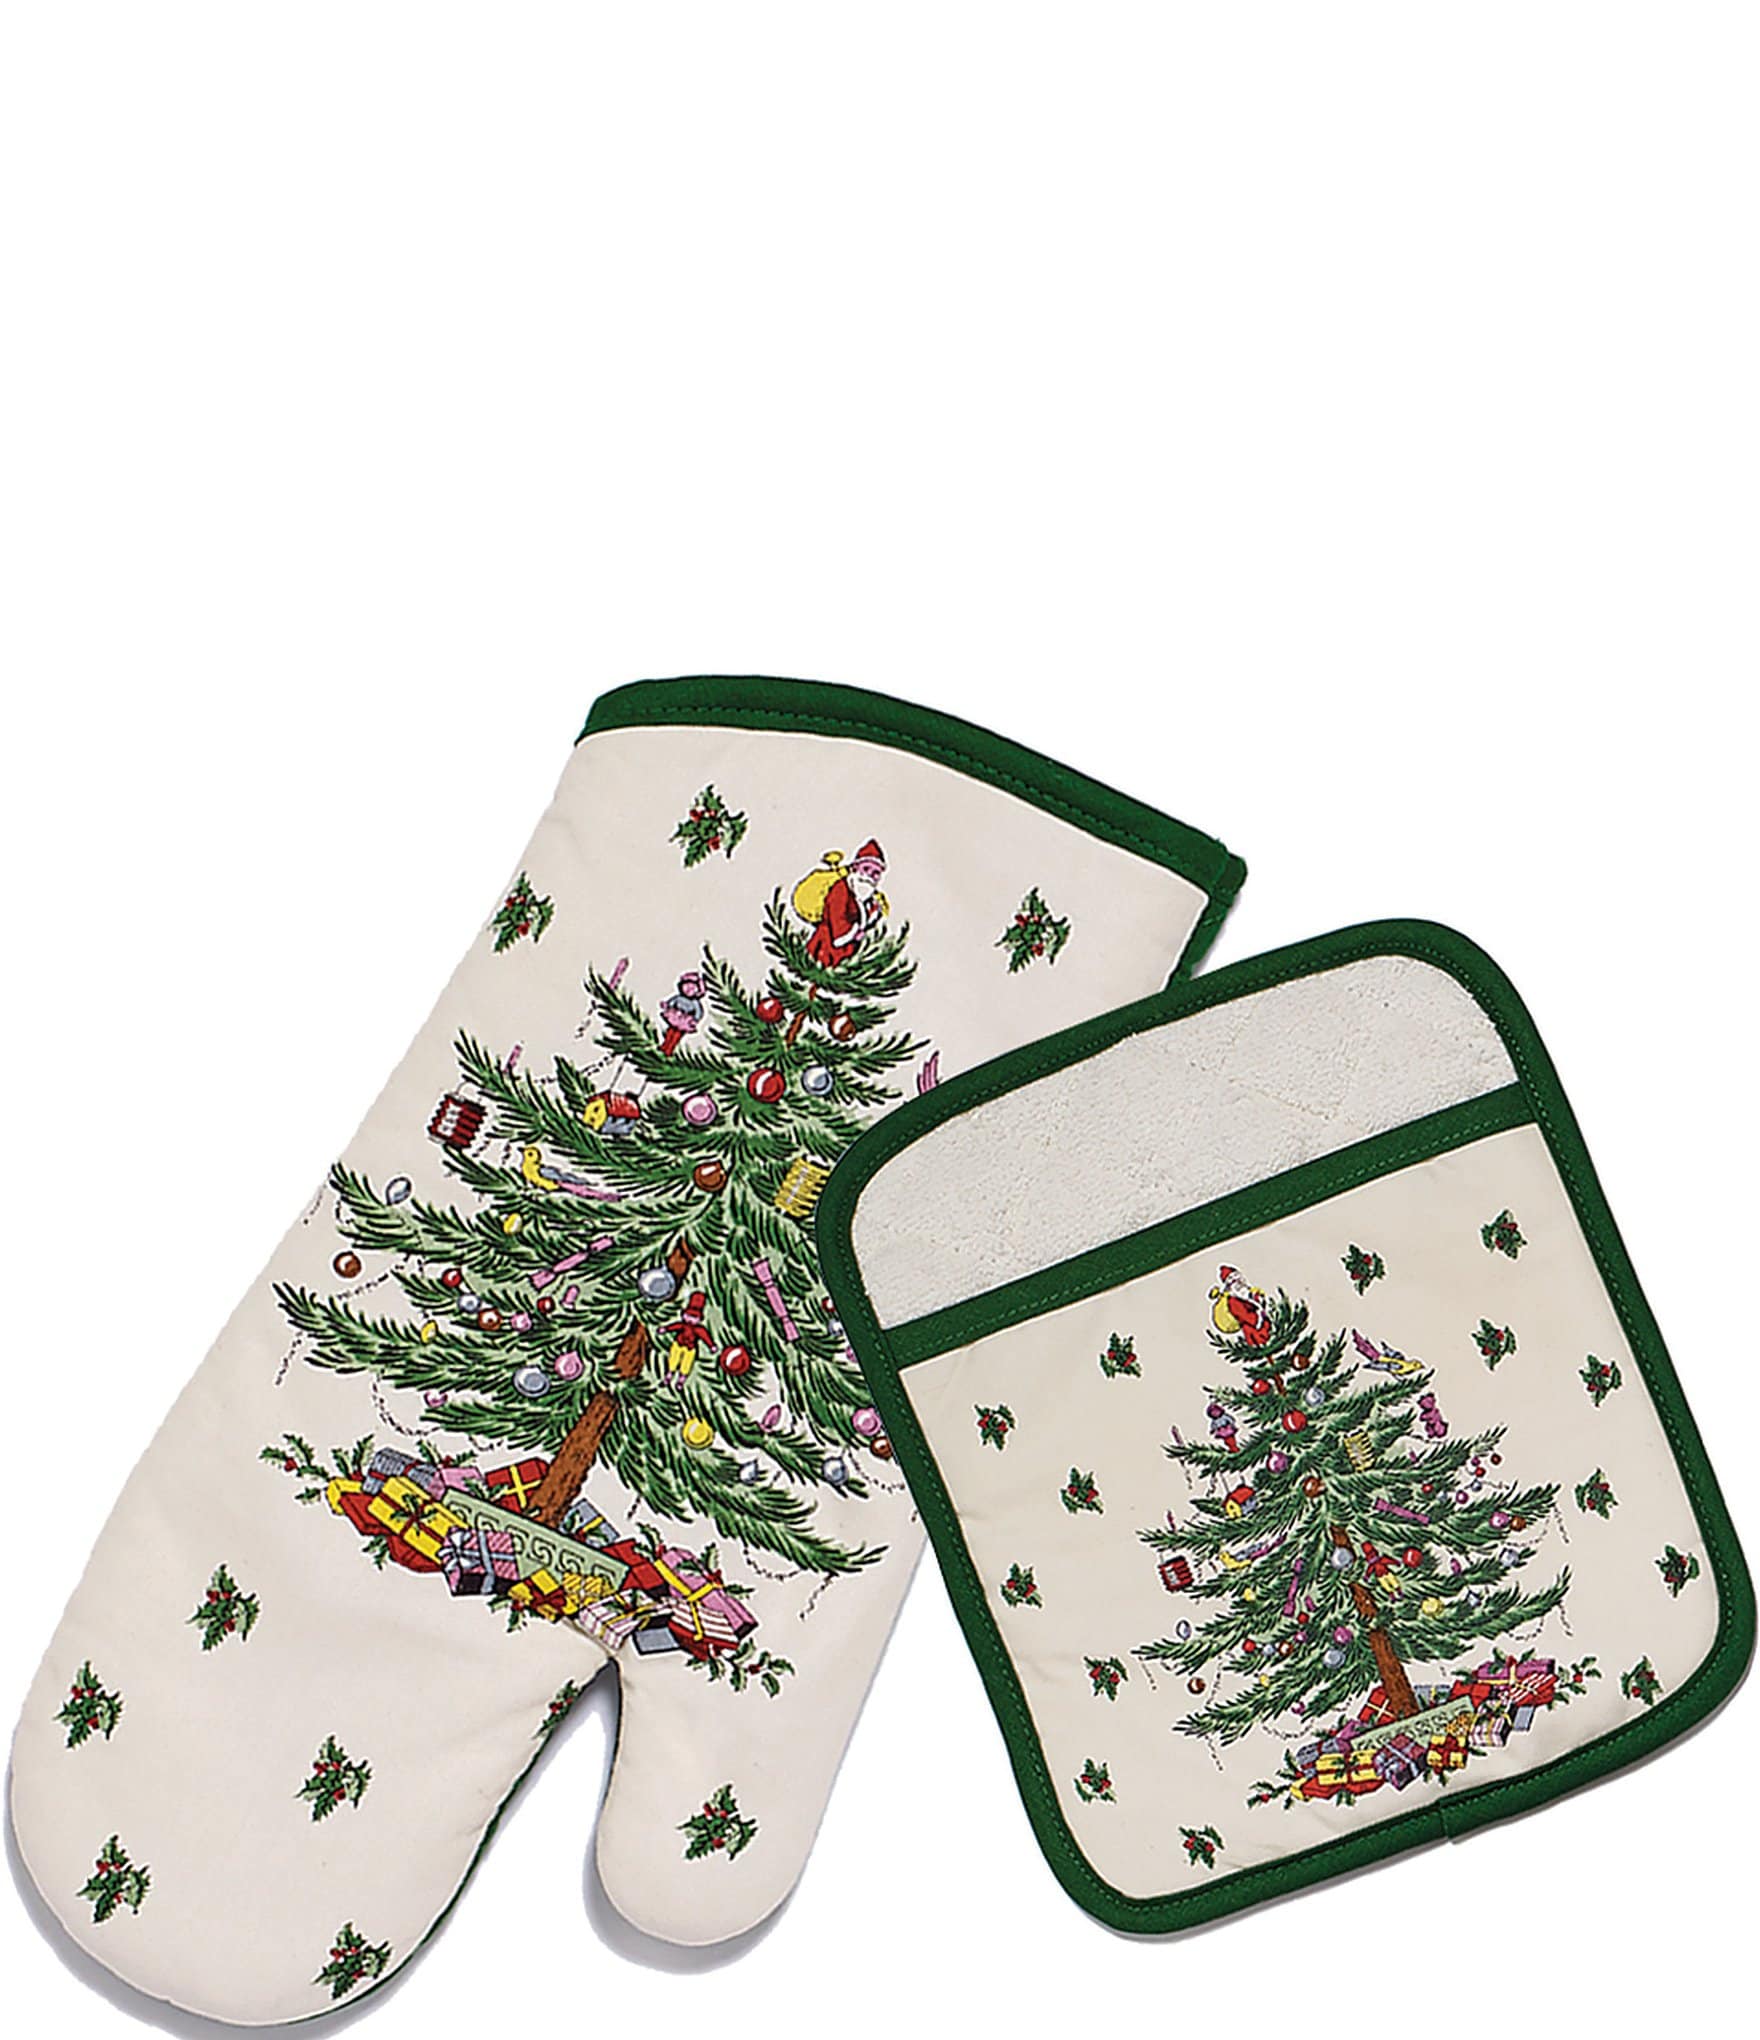 HPYNPES Christmas Oven Mitts and Pot Holders Sets - Merry Christmas Design